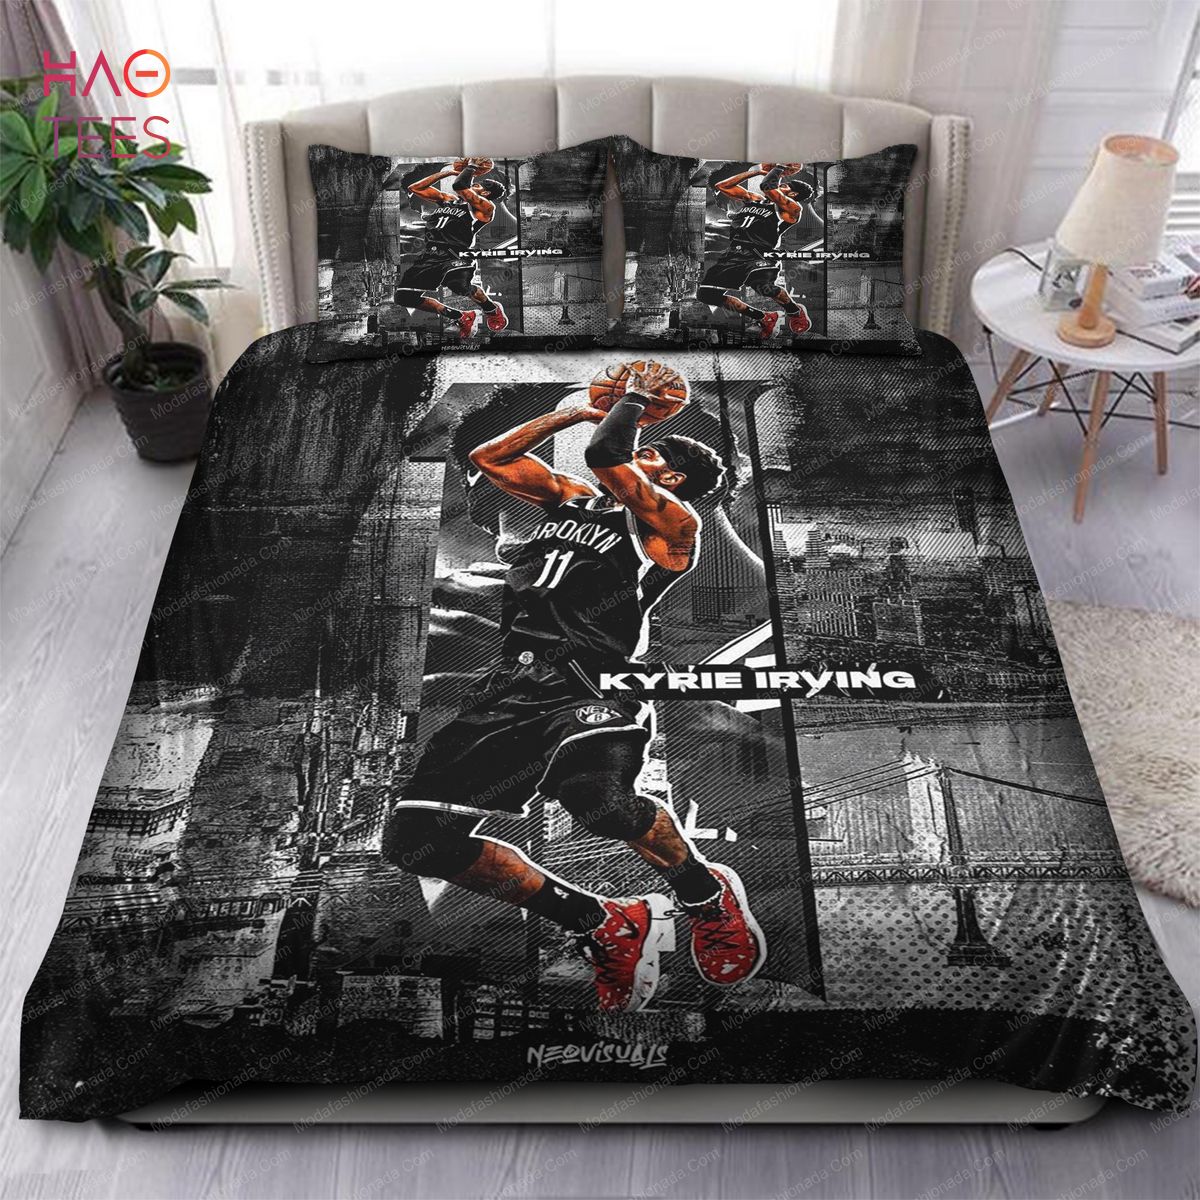 BEST Kyrie Irving Brooklyn Nets NBA Bedding Sets Limited Edition